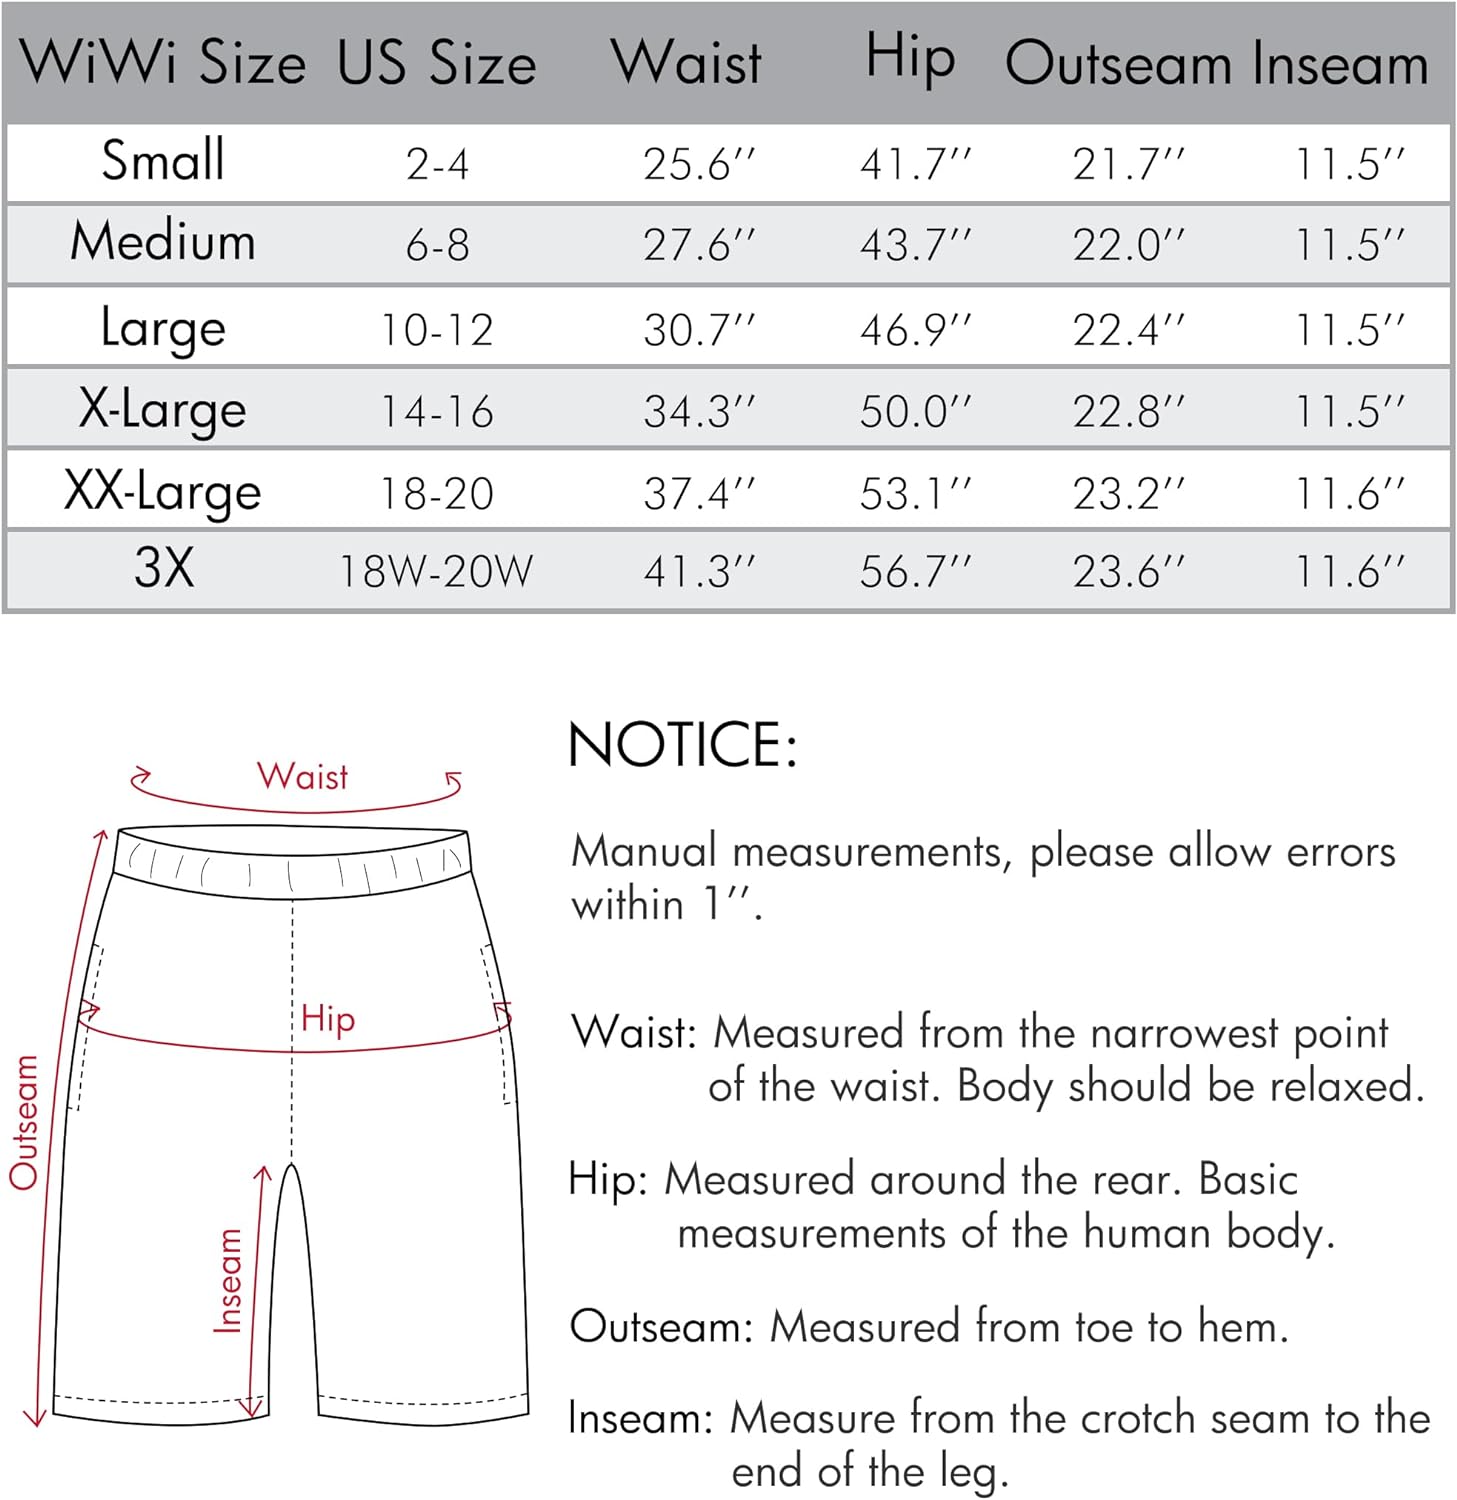 WiWi Soft Sleep Shorts for Women: A Review of Comfort and Style